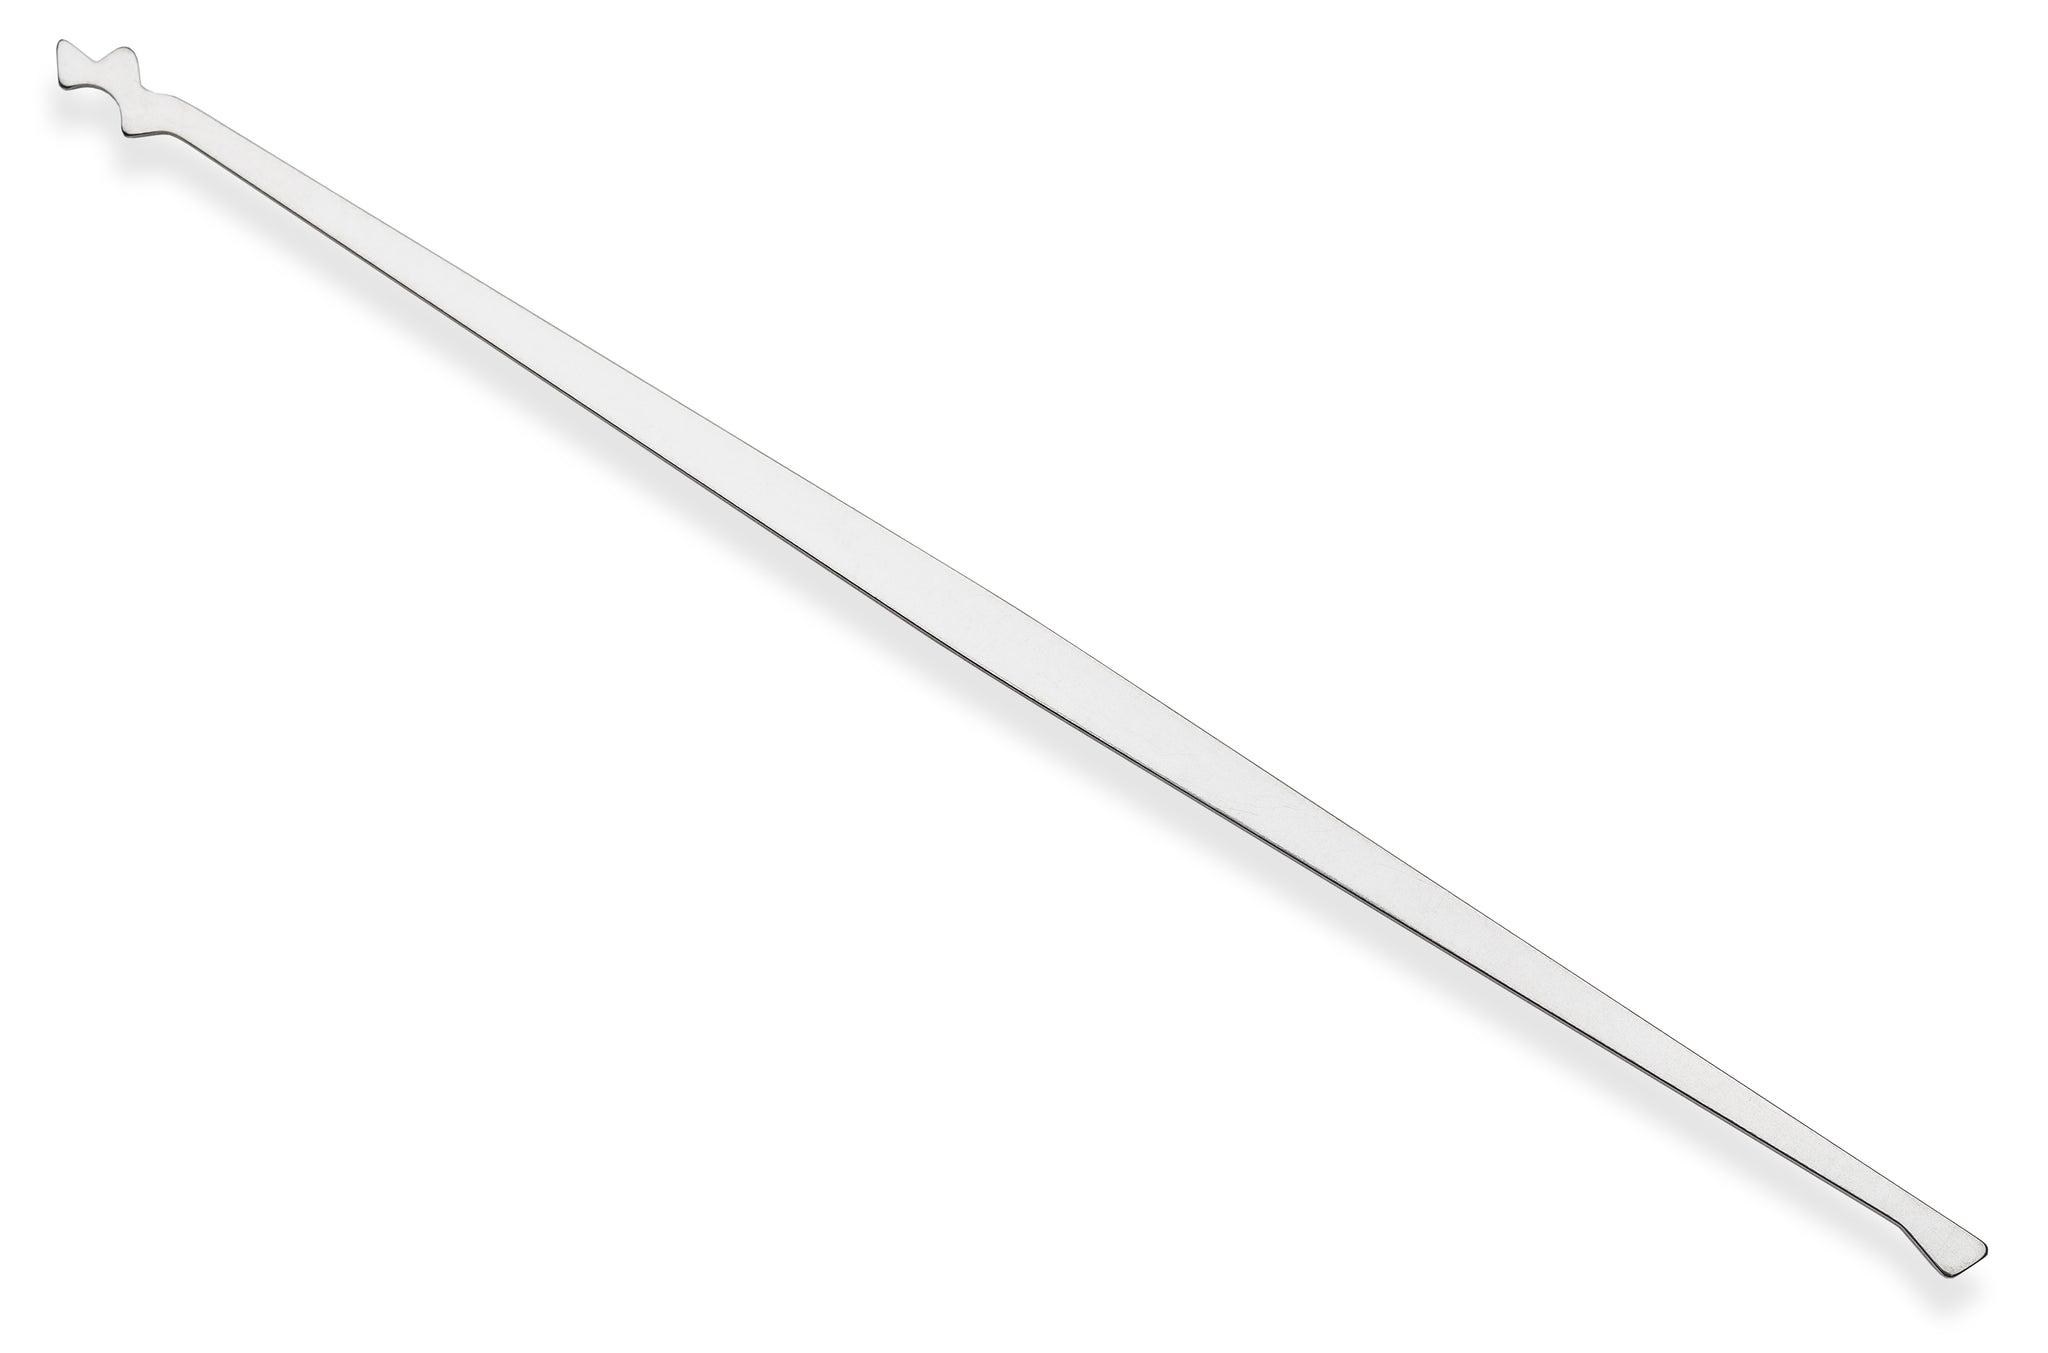 MAX-16 High Yield Long Double-Ended Lock Pick (.031")